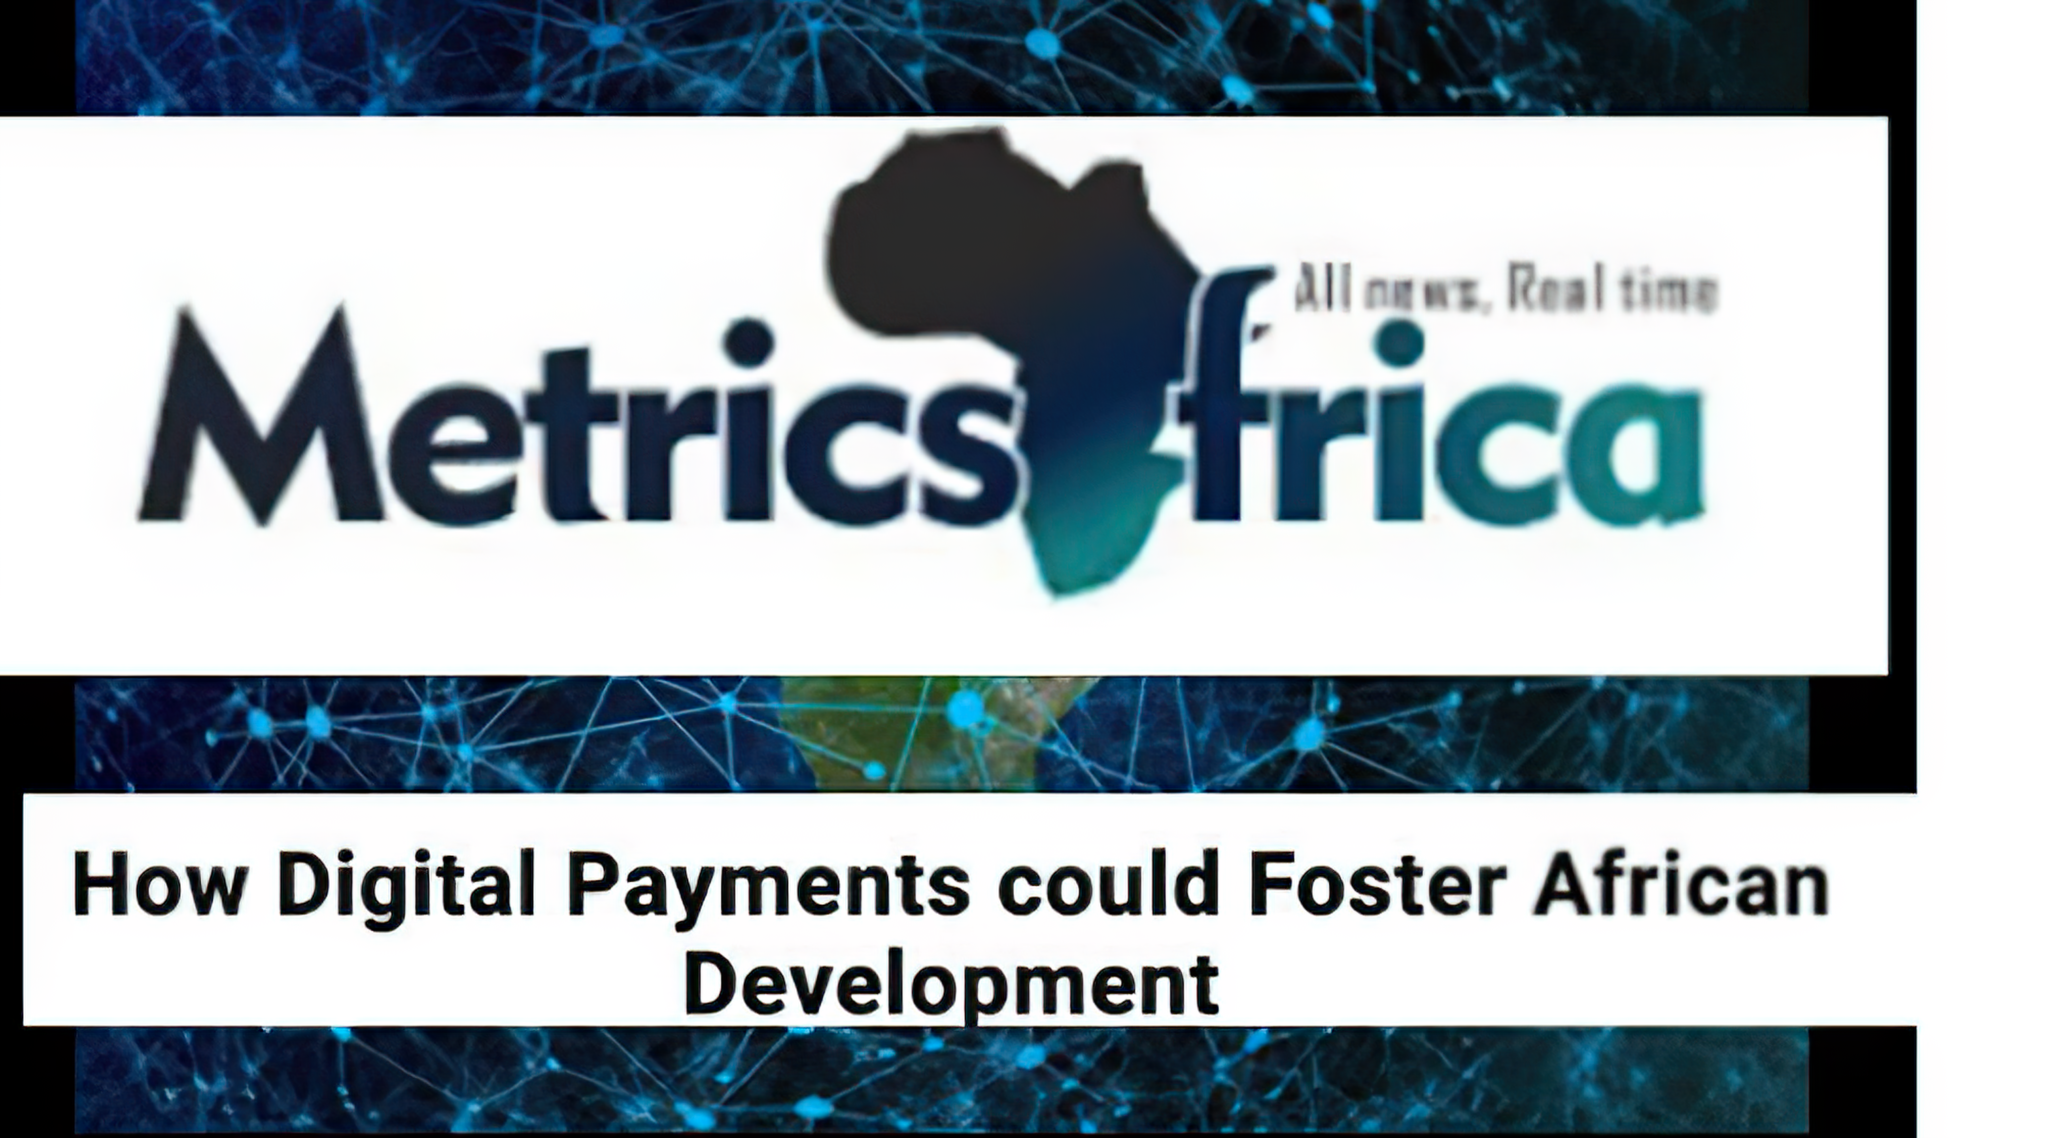 How Digital Payments could Foster African Development